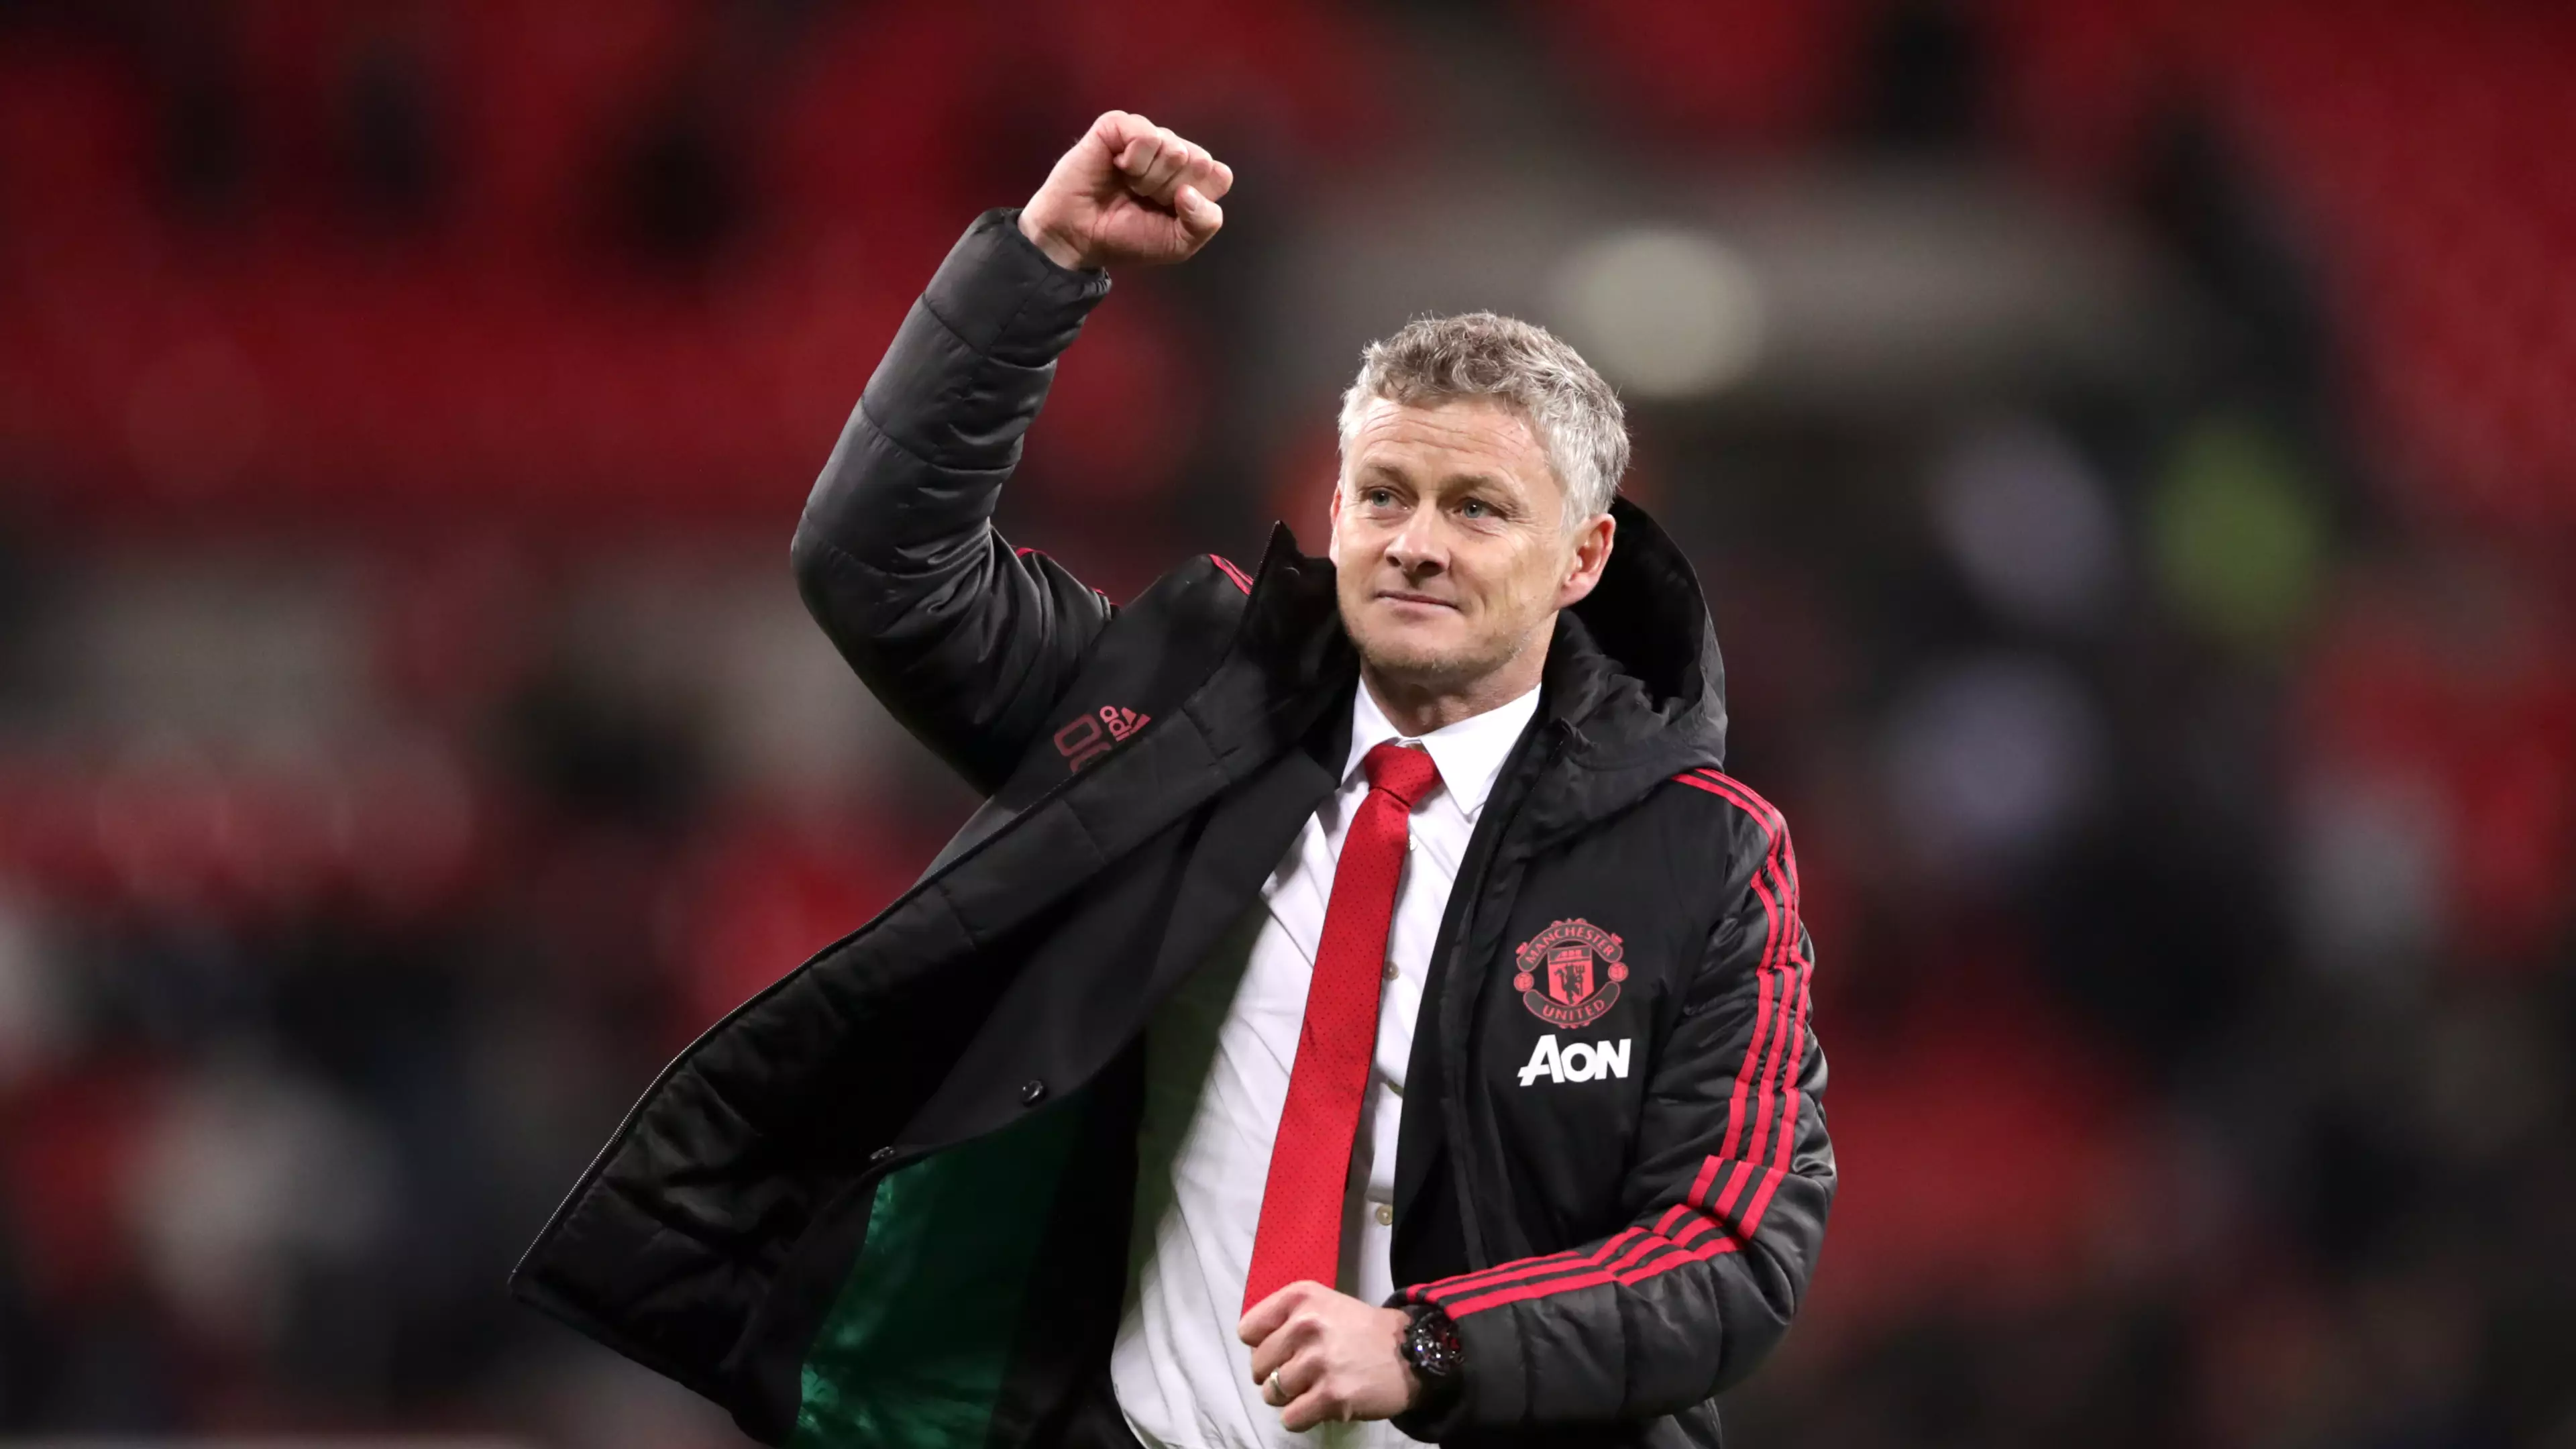 Ole Gunnar Solskjaer Has Told Manchester United Staff To Stop Calling Him 'Boss'